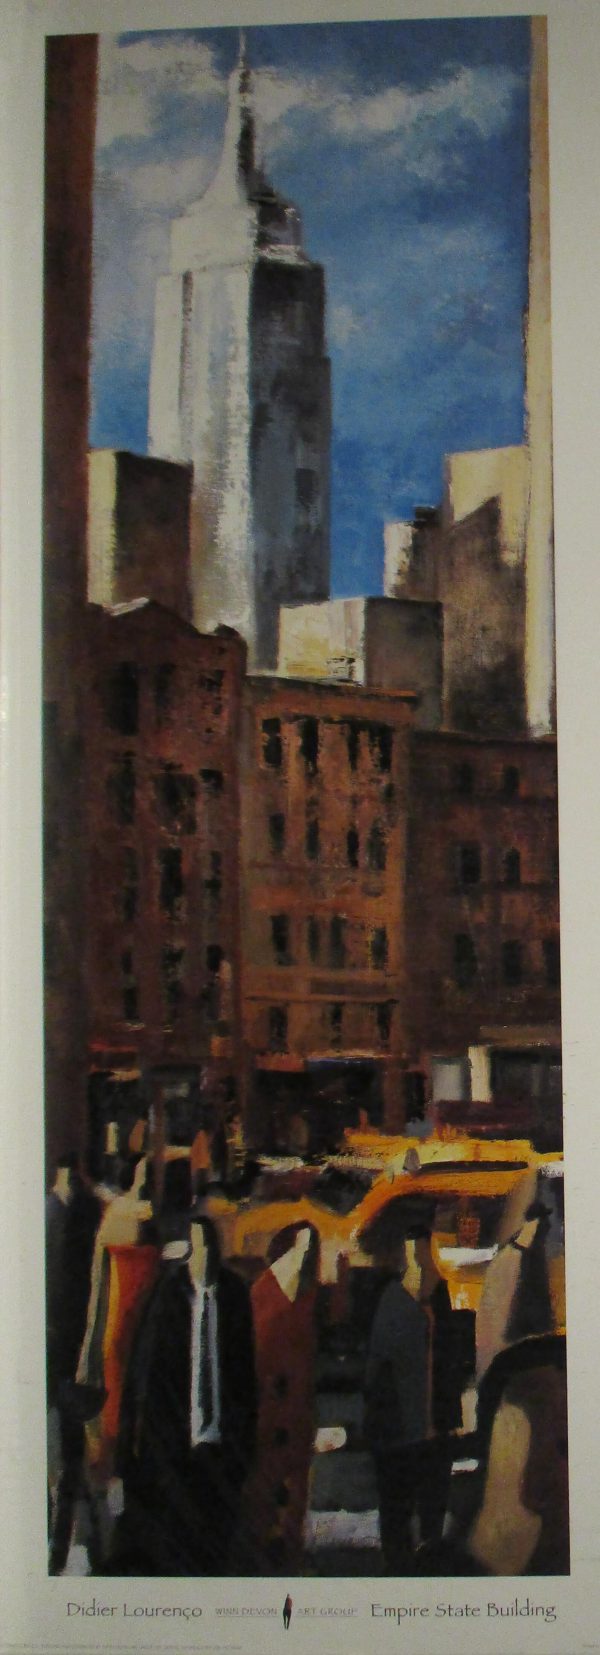 Empire State Building by Didier Lourenco